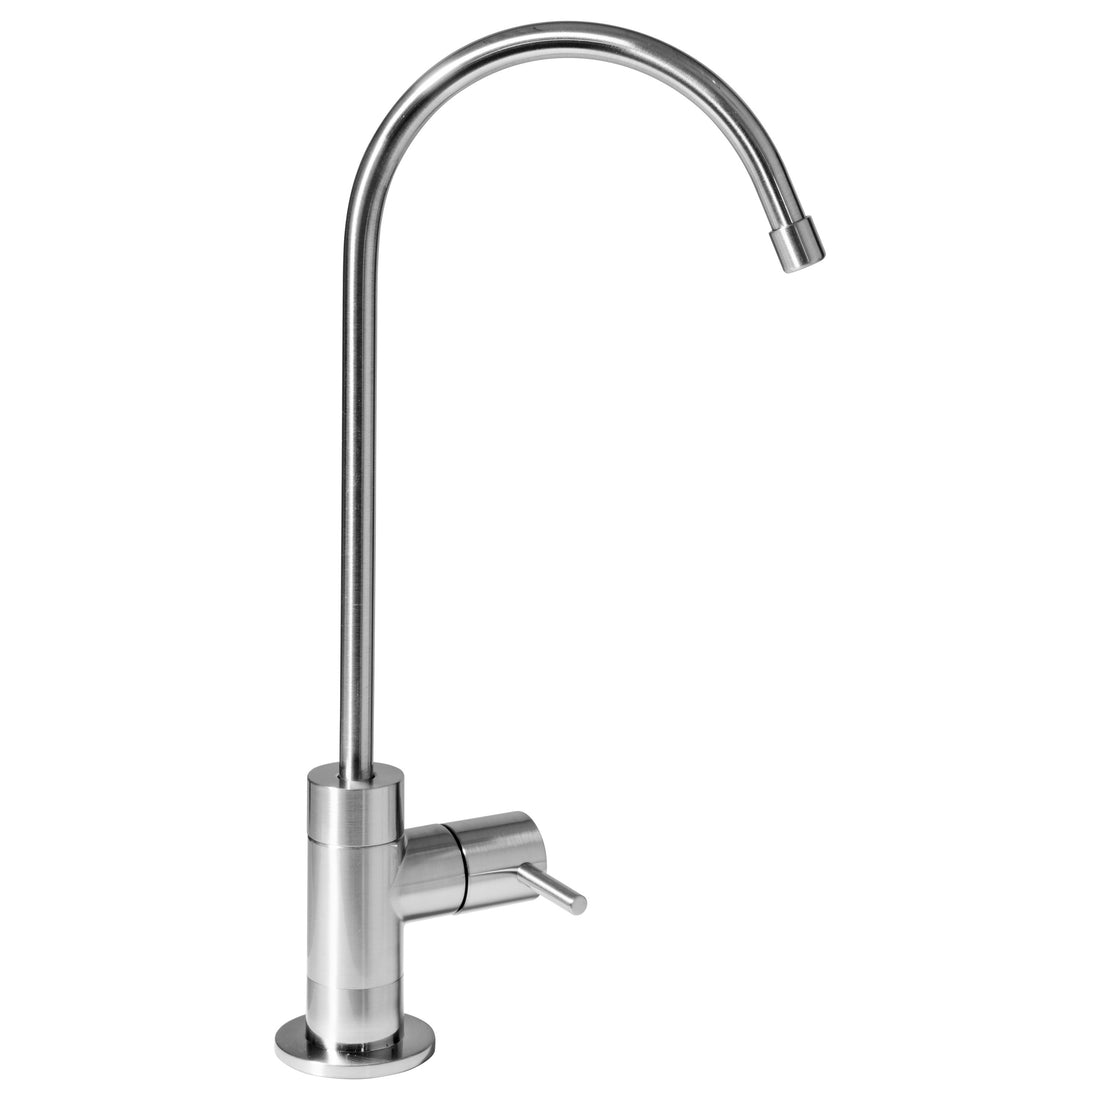 Aquasure Designer Series Contemporary Styled Drinking Water Designer Faucet with Ceramic Disc Valve and LED Indicator (Brushed Nickel)